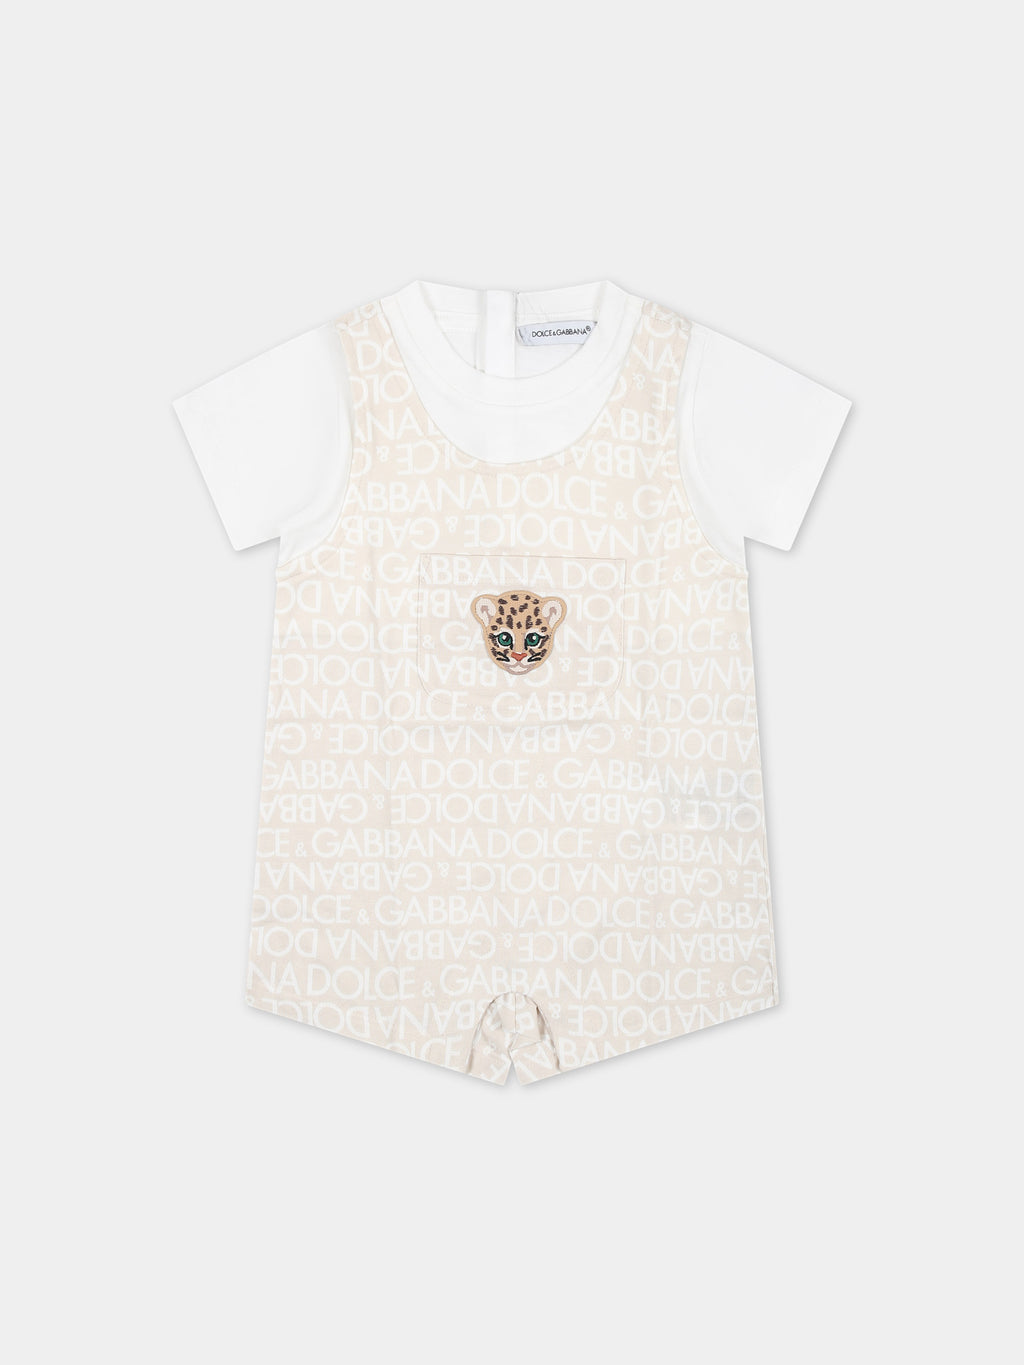 Beige romper for babies with tiger and all-over logo